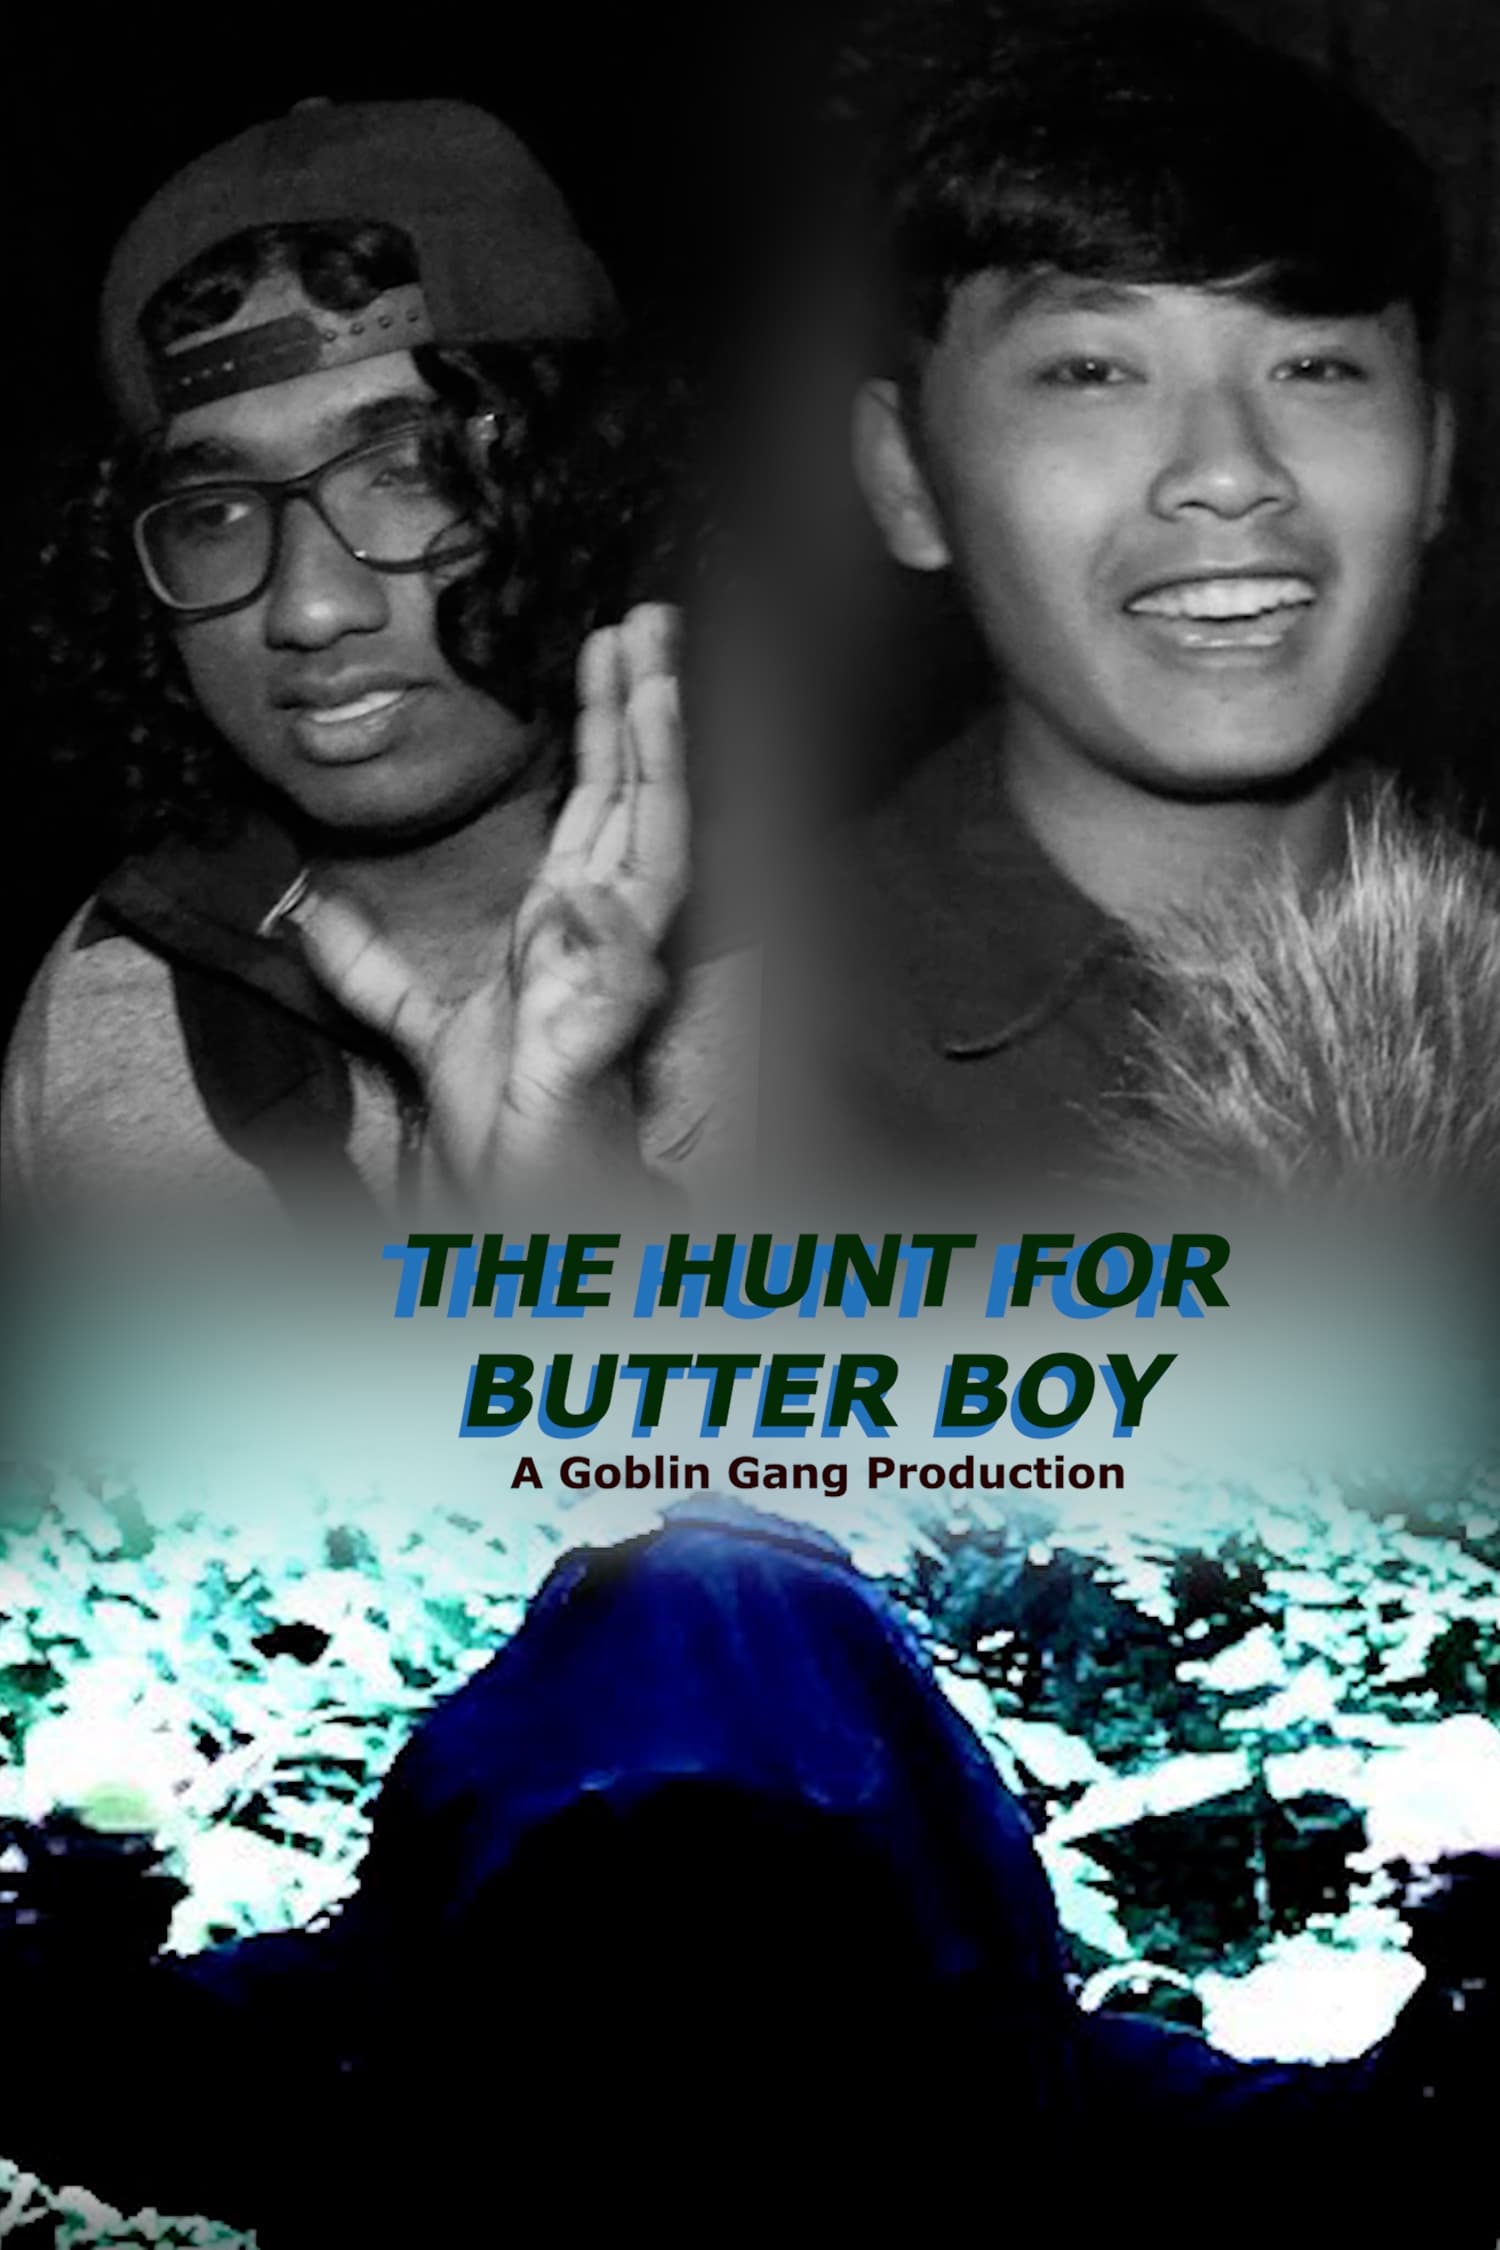 The Hunt for Butter Boy